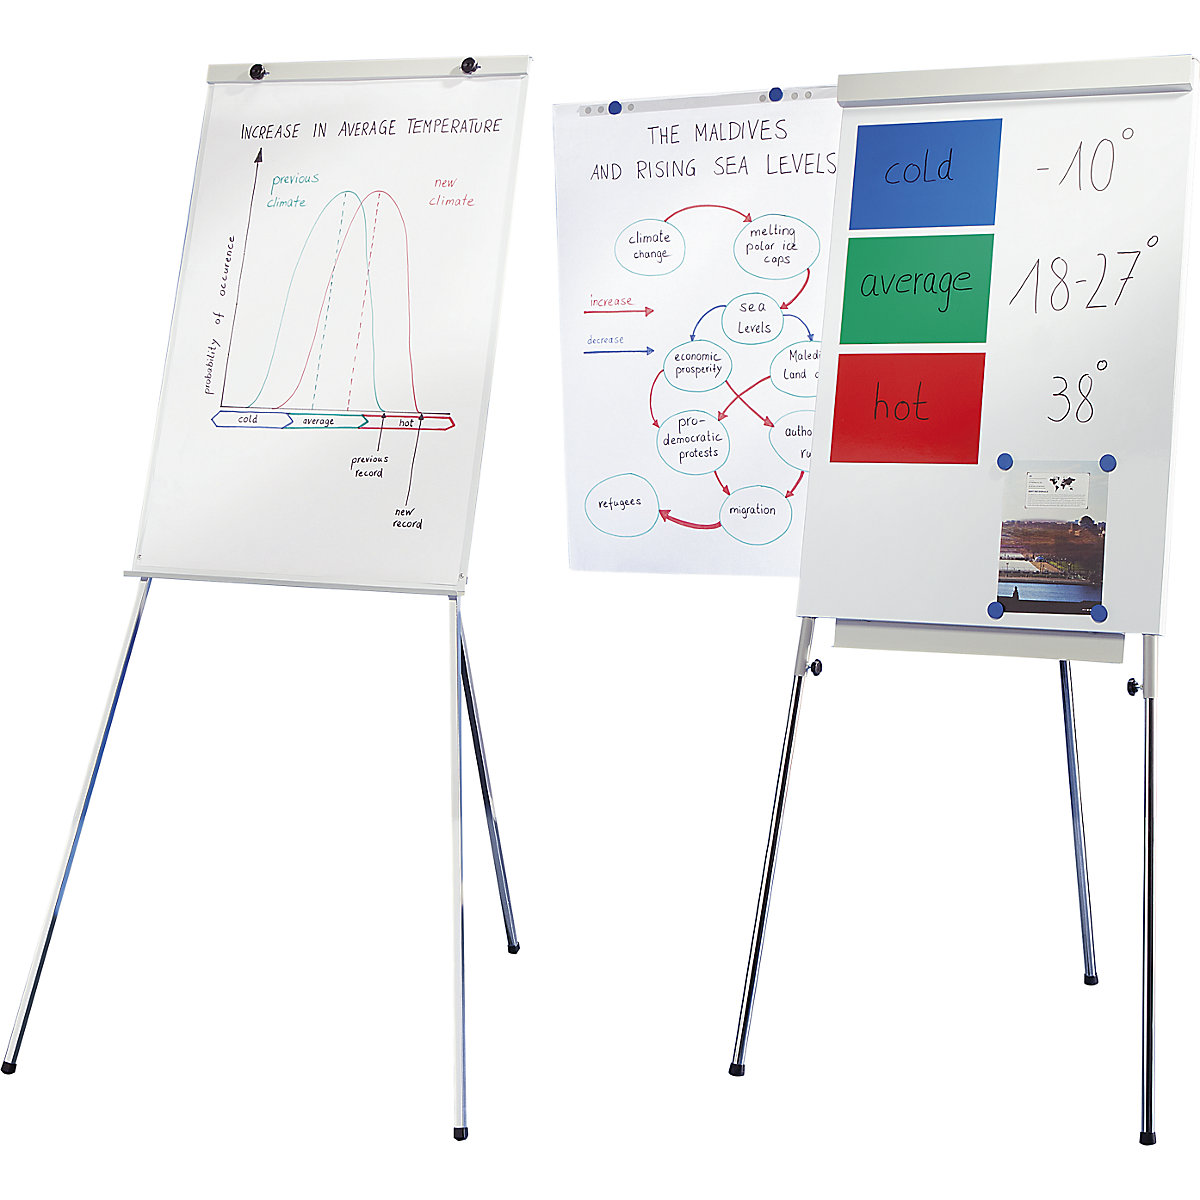 Flip Charts 101: How to Use Flip Charts Effectively